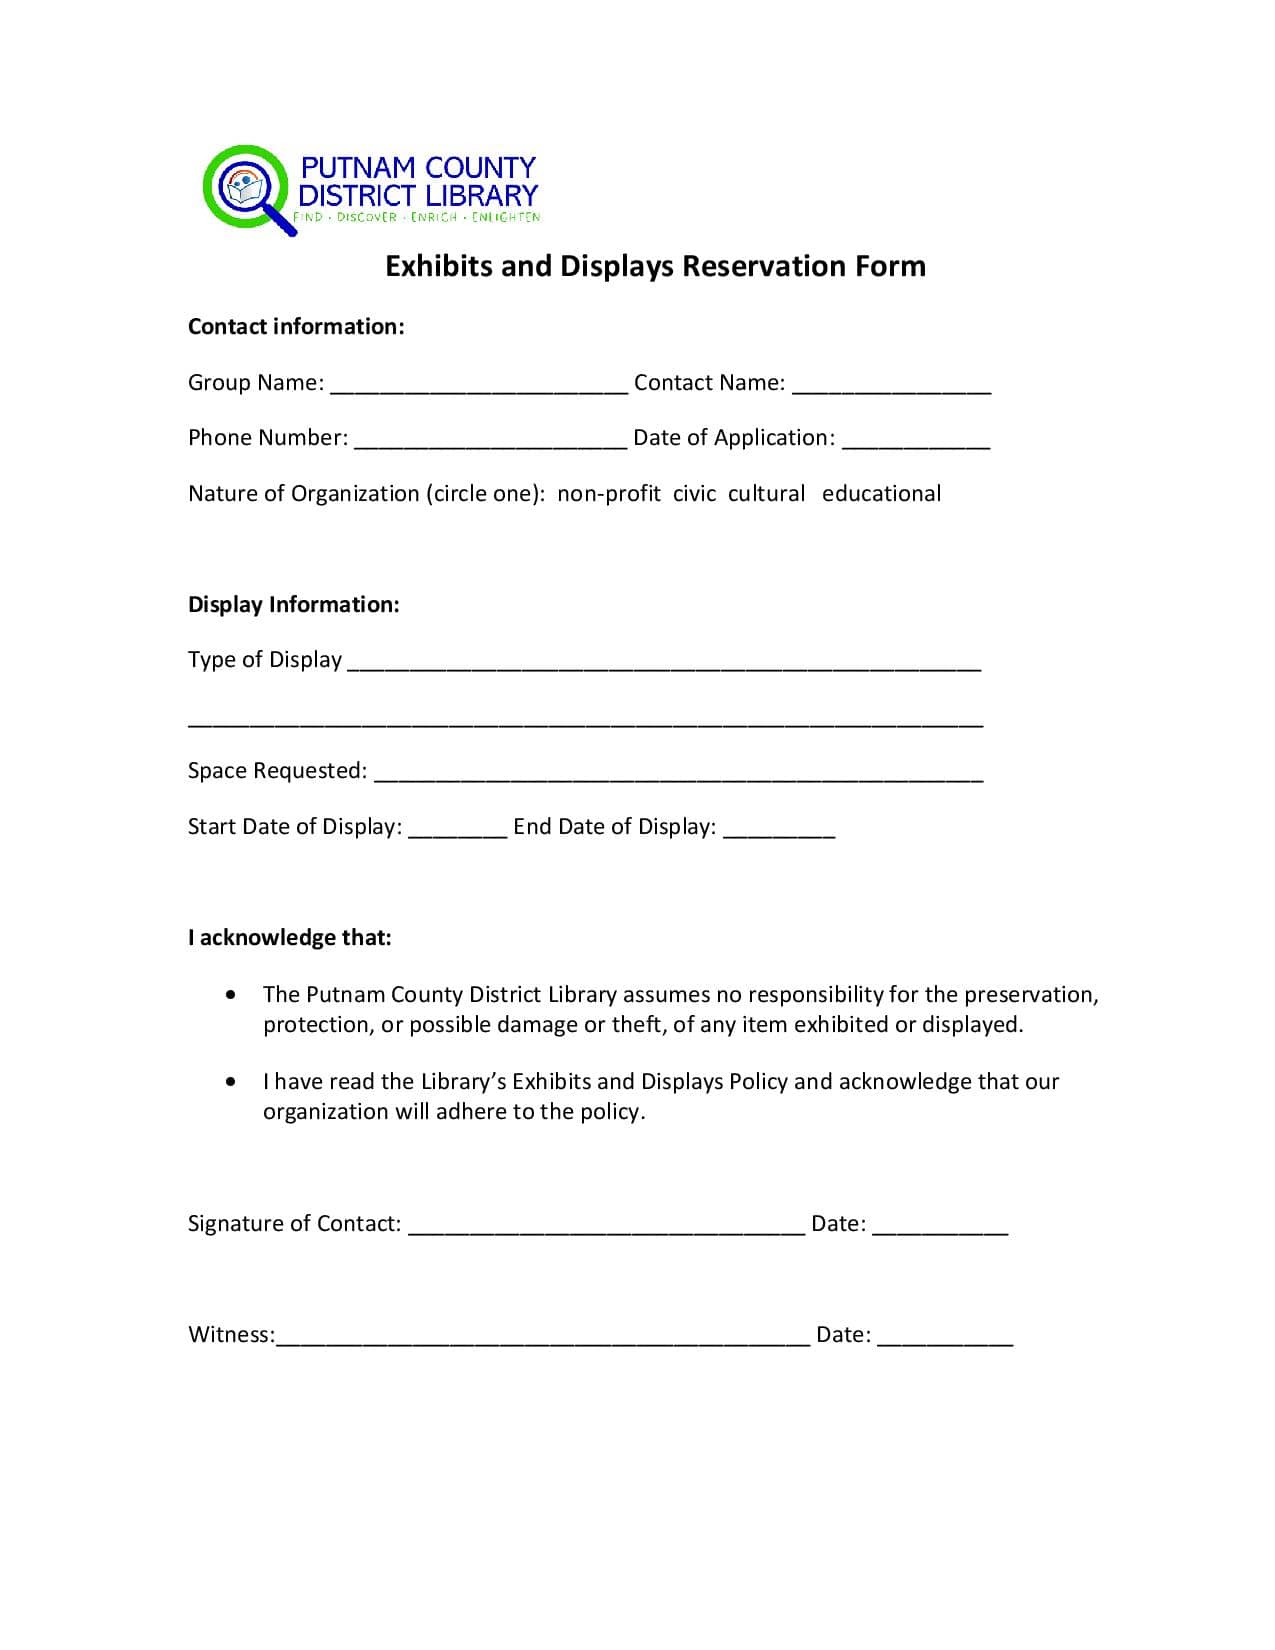 Exhibits and Display Registration Form